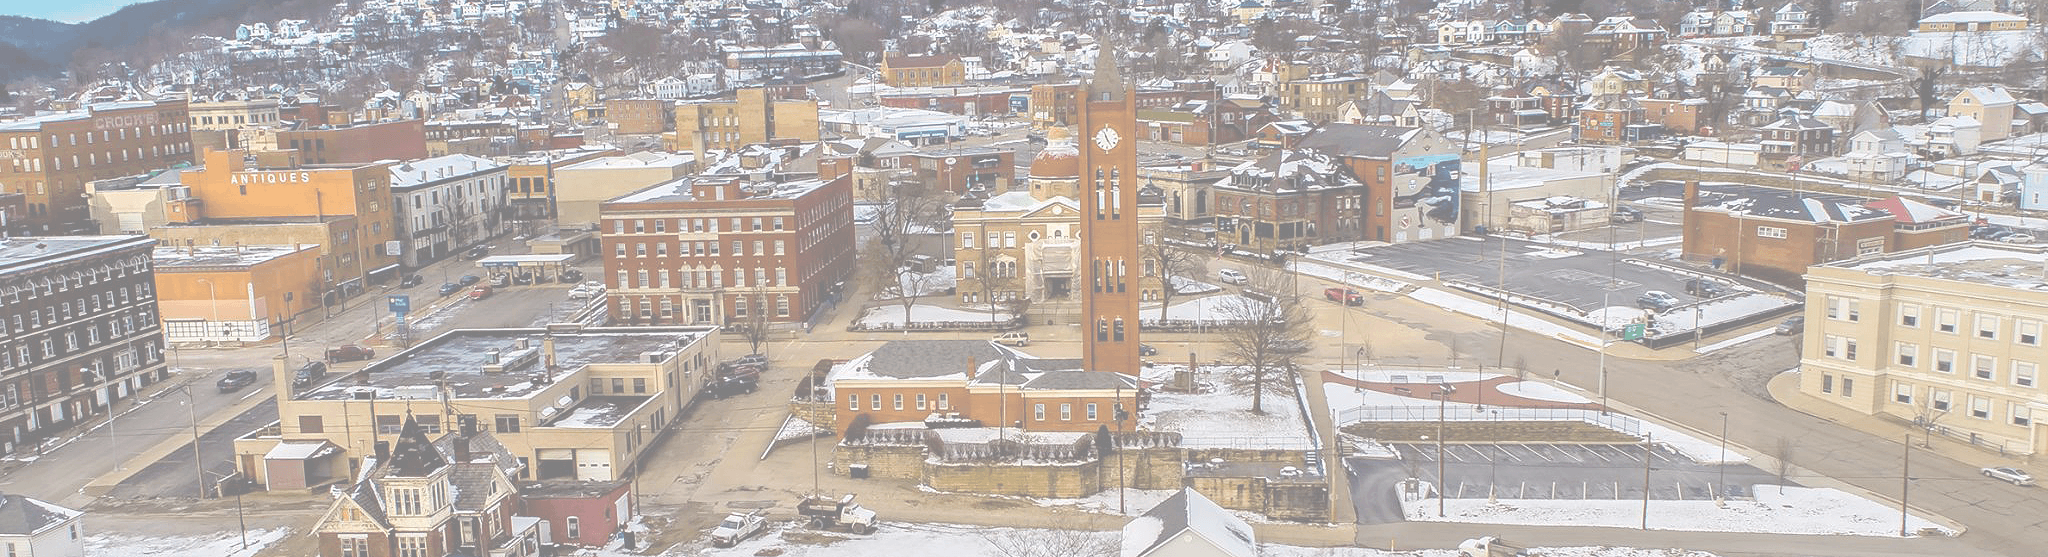 East Liverpool Clock Tower